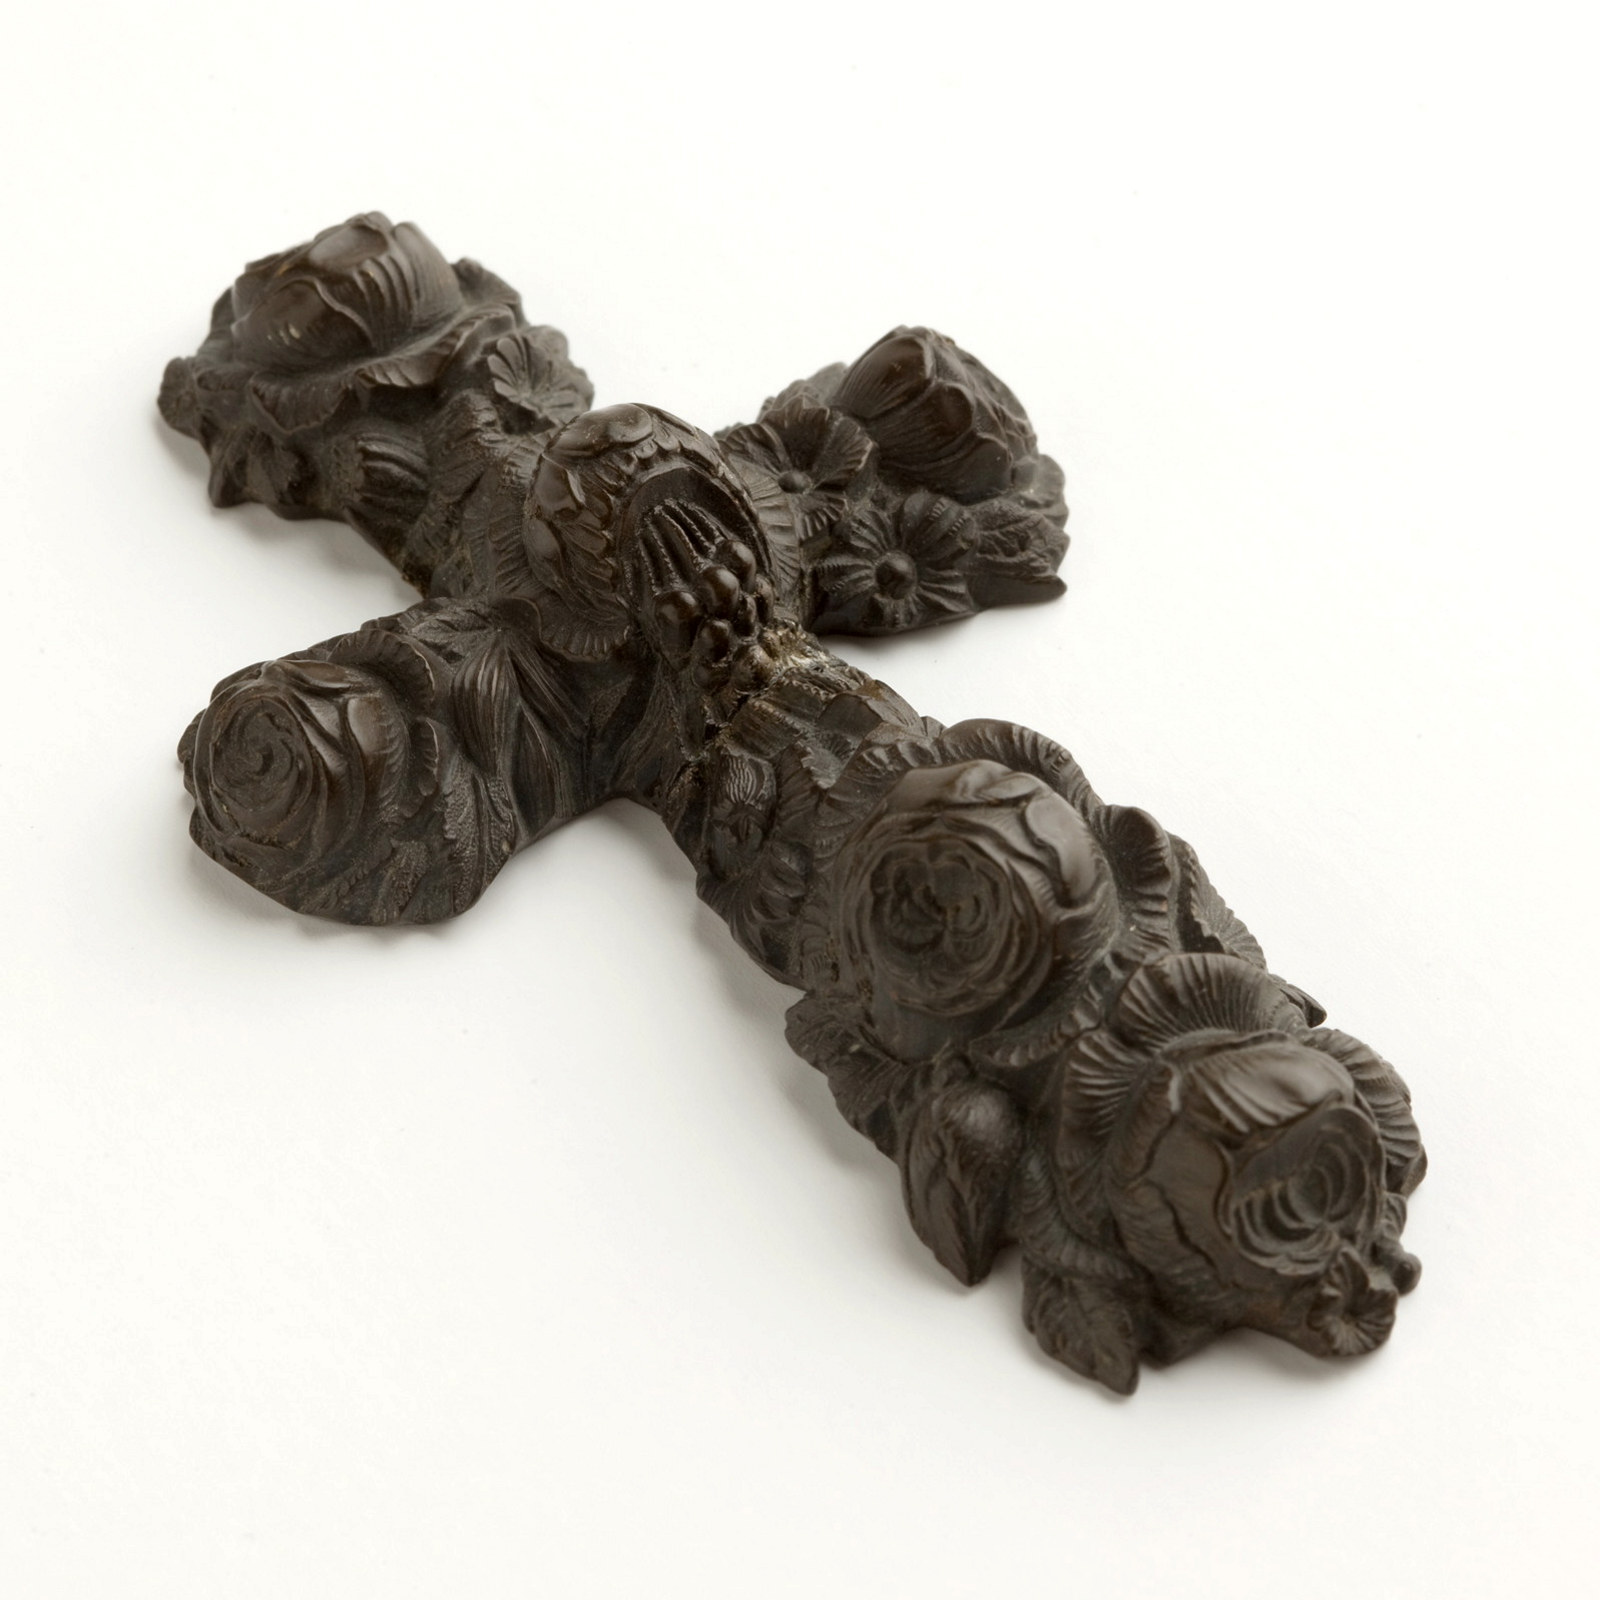 Handcarved cross with floral relief decoration, circa 1860s